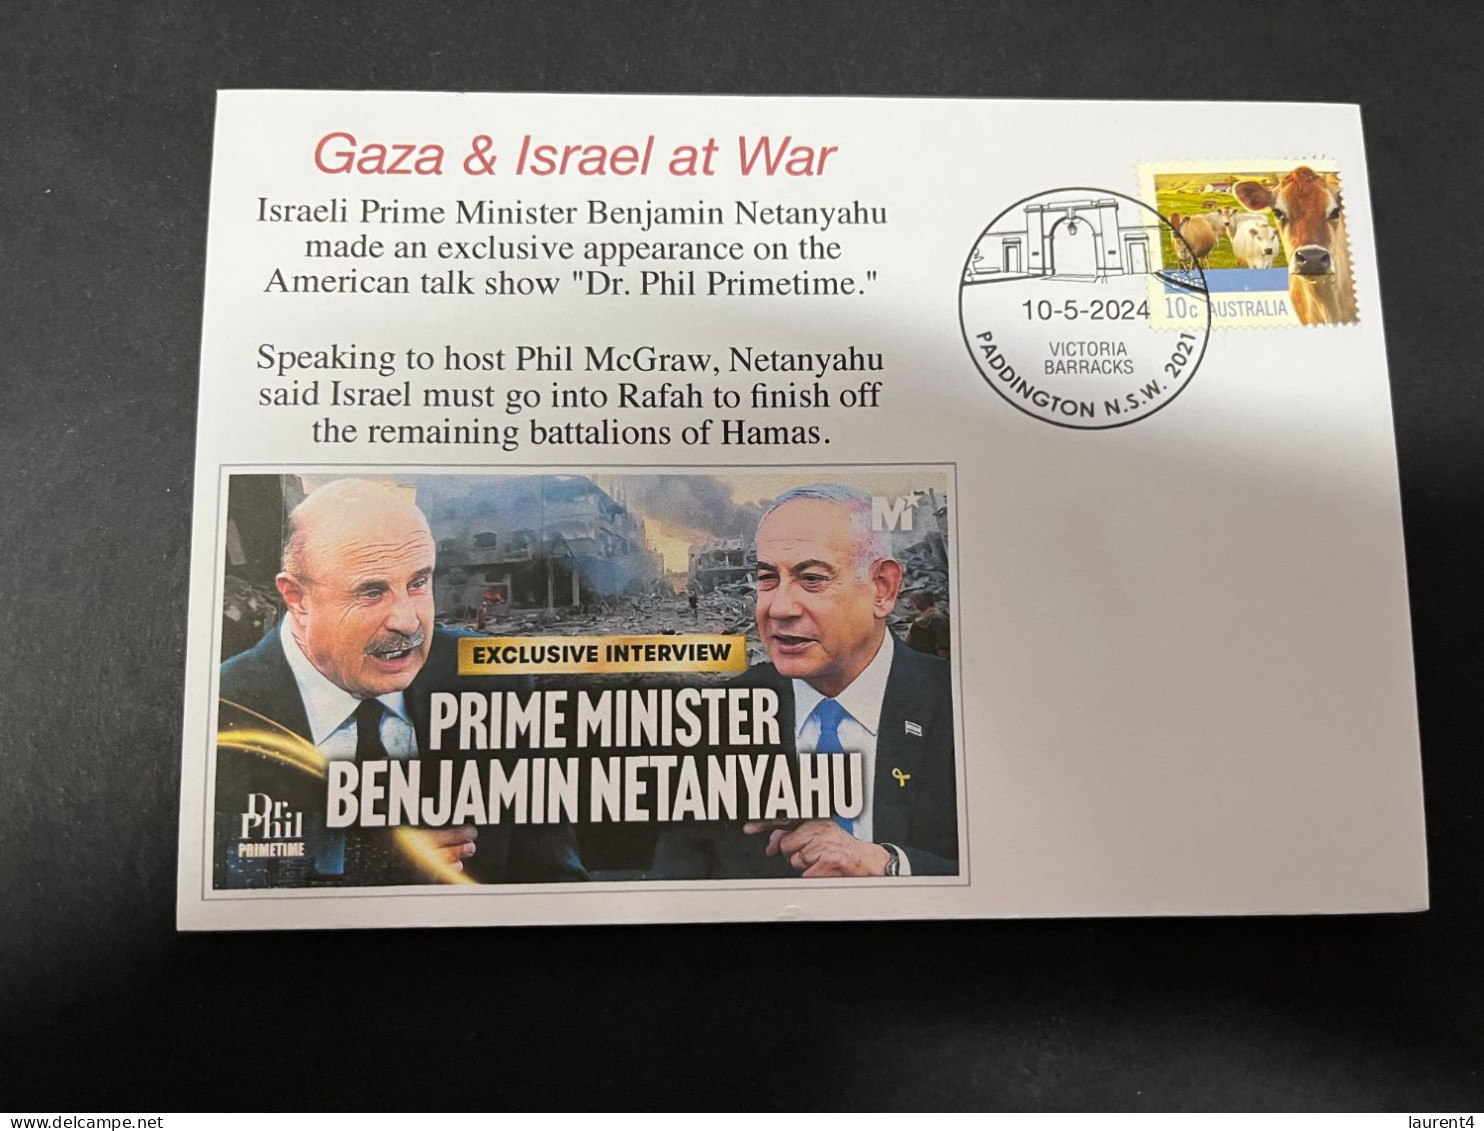 11-5-2024 (4 Z 42) GAZA War - Israel Prime Minister Exclusive Appearance On The American Talk Show "Dr Phil Primetine" - Militaria